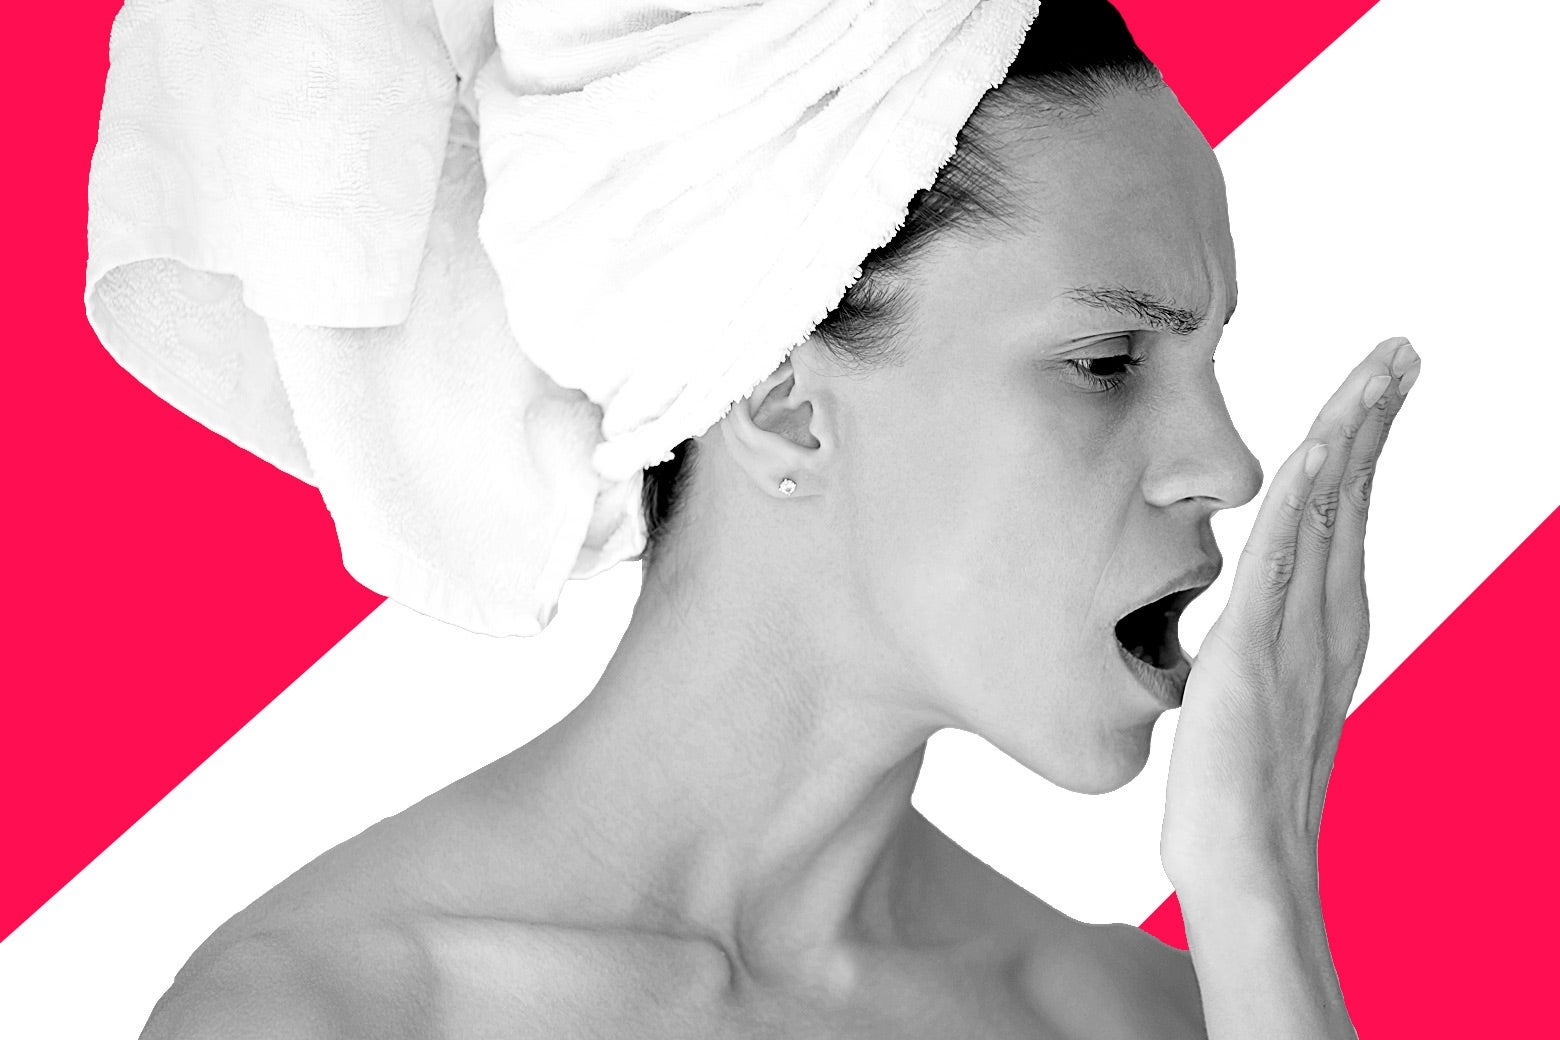 A woman w/ a towel on her head trying to smell her own breath against her palm.